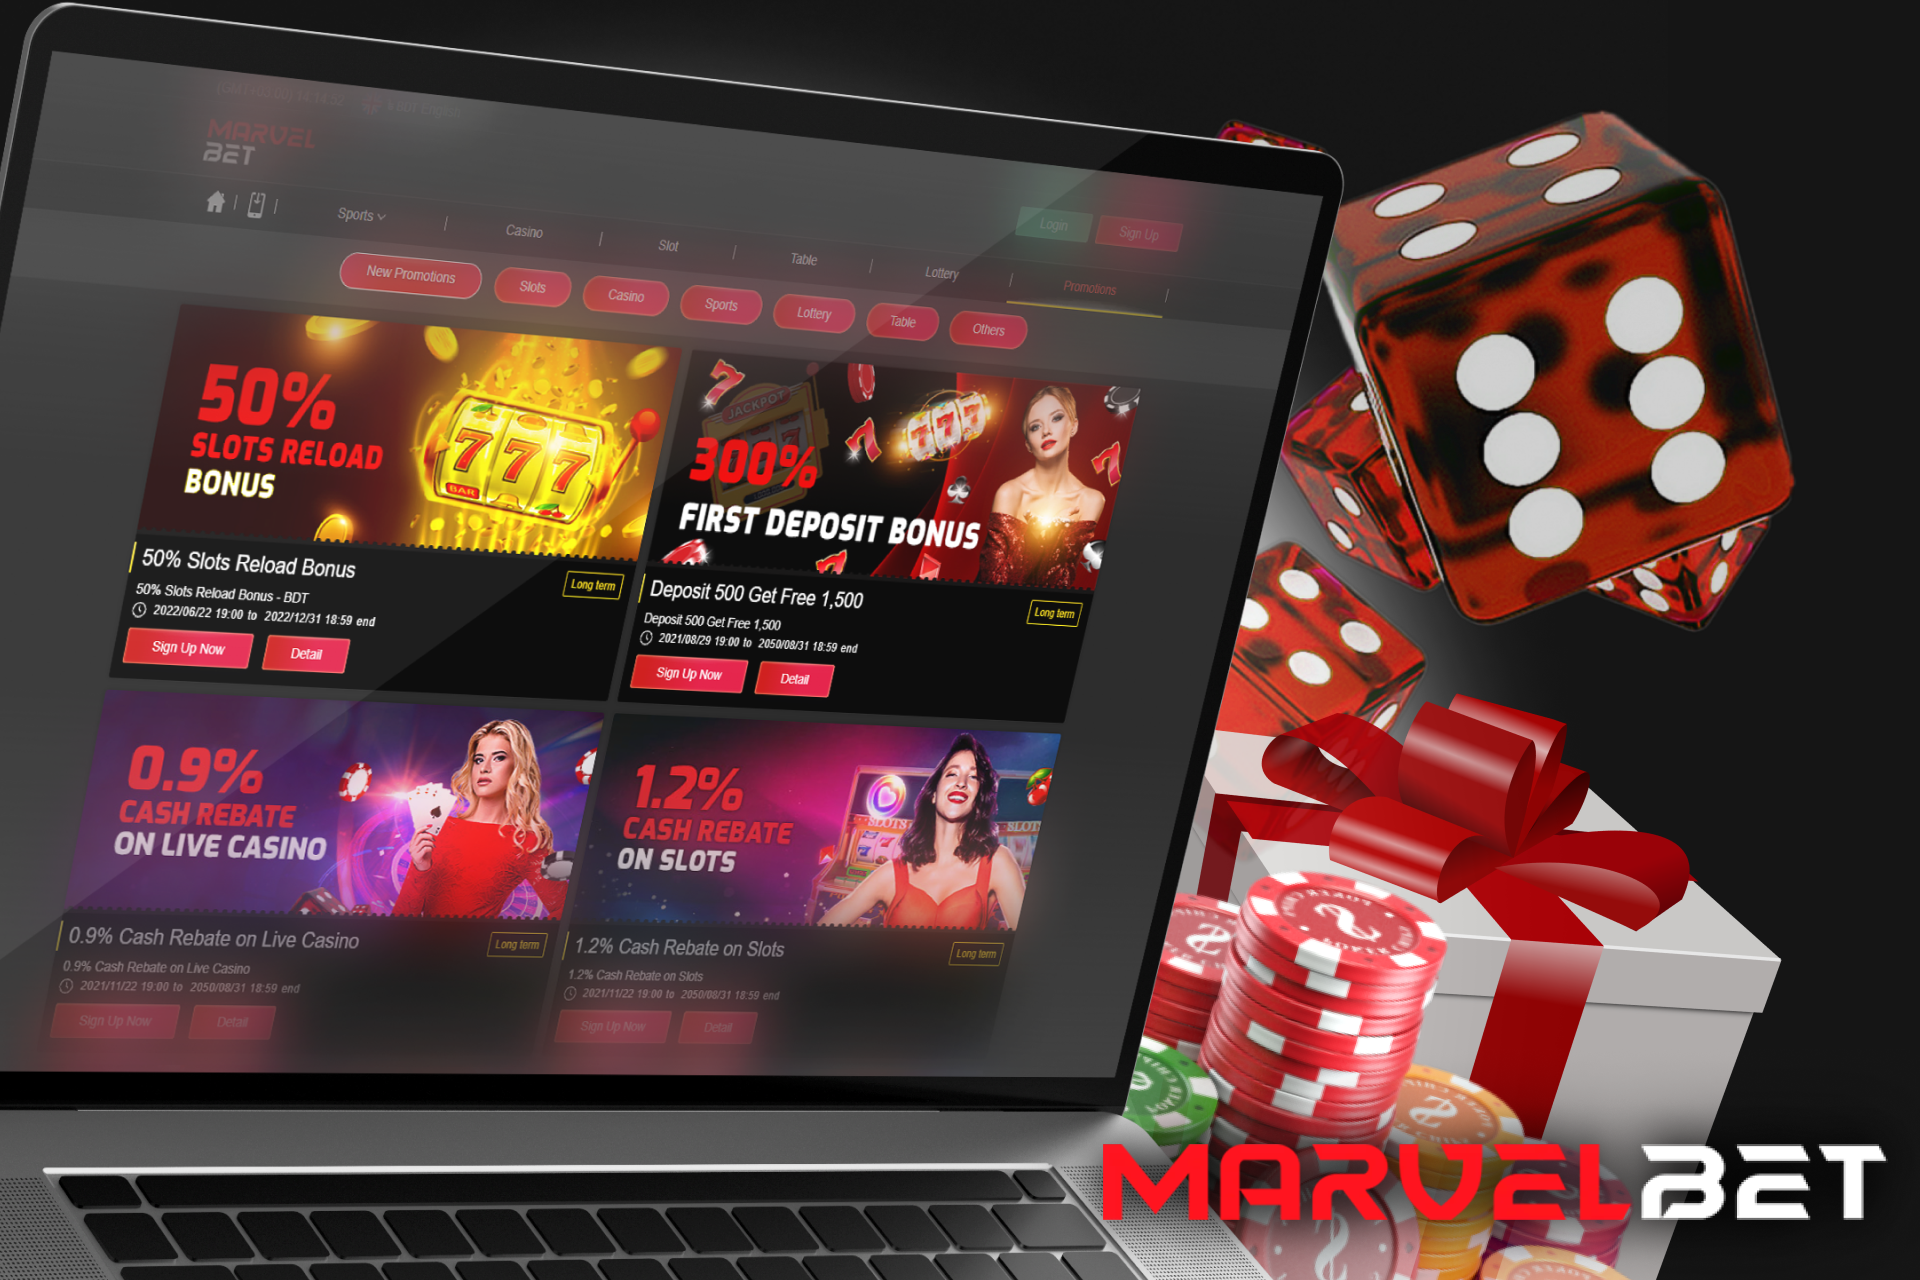 Playing on mobile devices at online casinos in India: This Is What Professionals Do